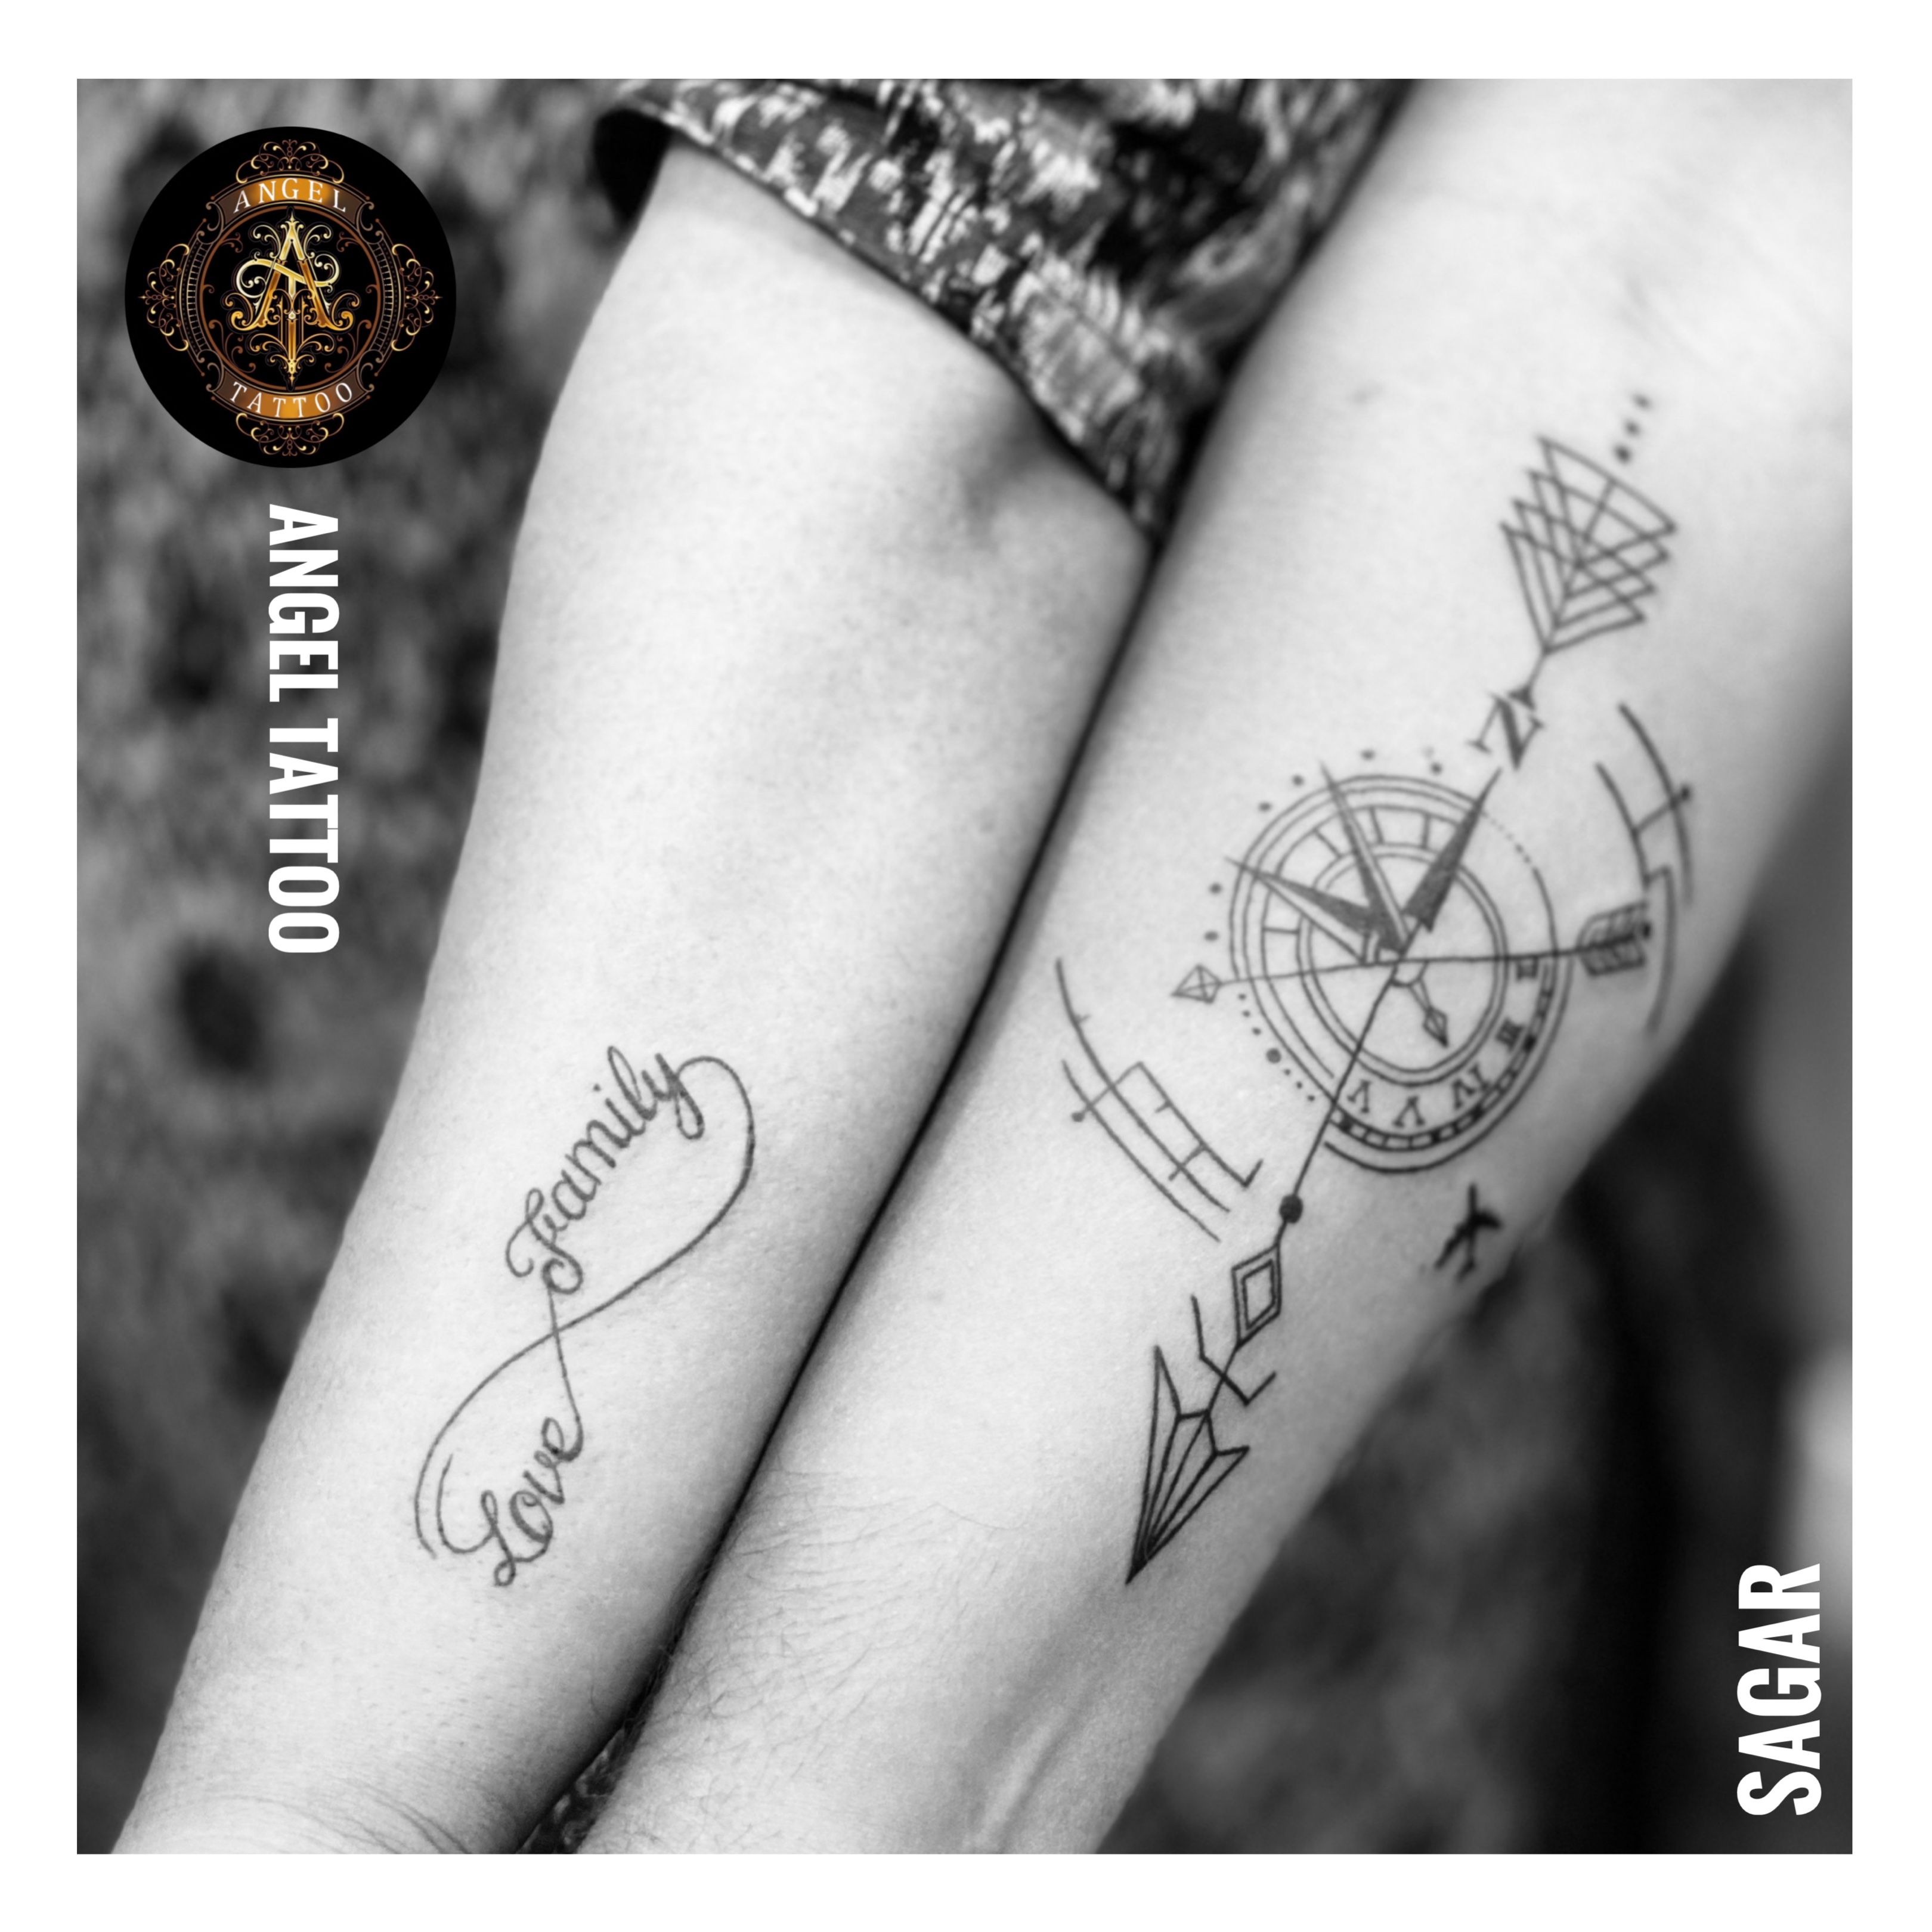 Sagar solanki on Instagram Some of our letter tattoo designs Talk to us  for customised your tattoos lettertattoo smalltattoo tattoo tattoos  tattoodesign